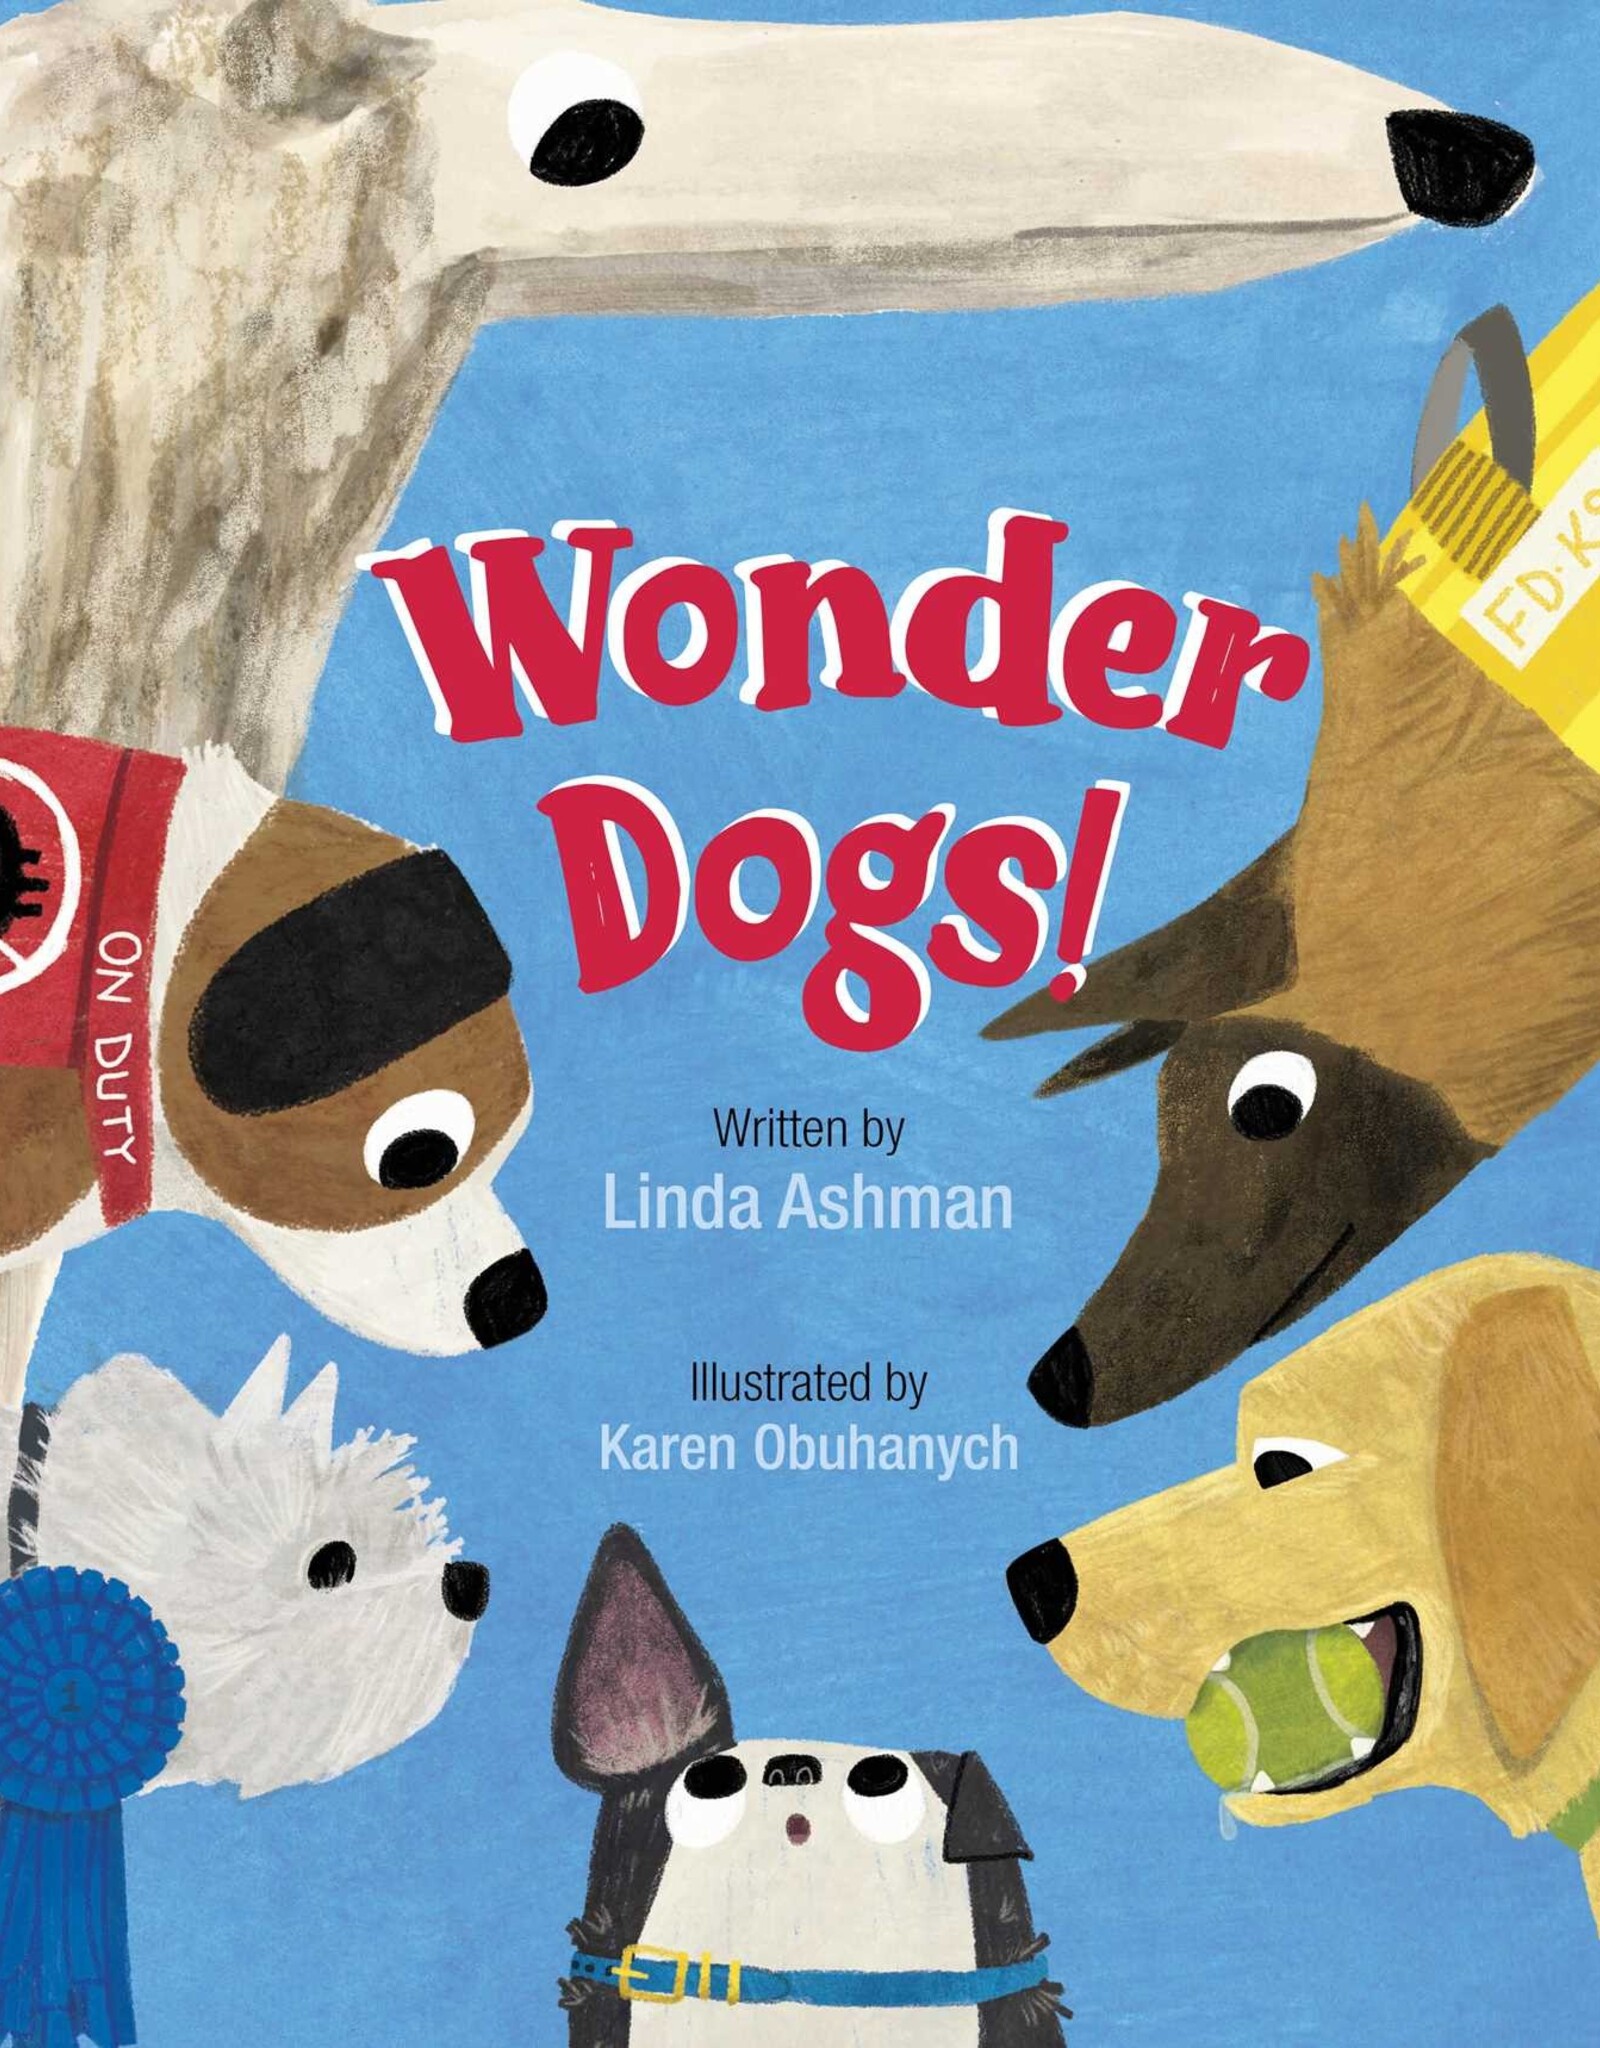 BOOK PUBLISHERS WONDER DOGS